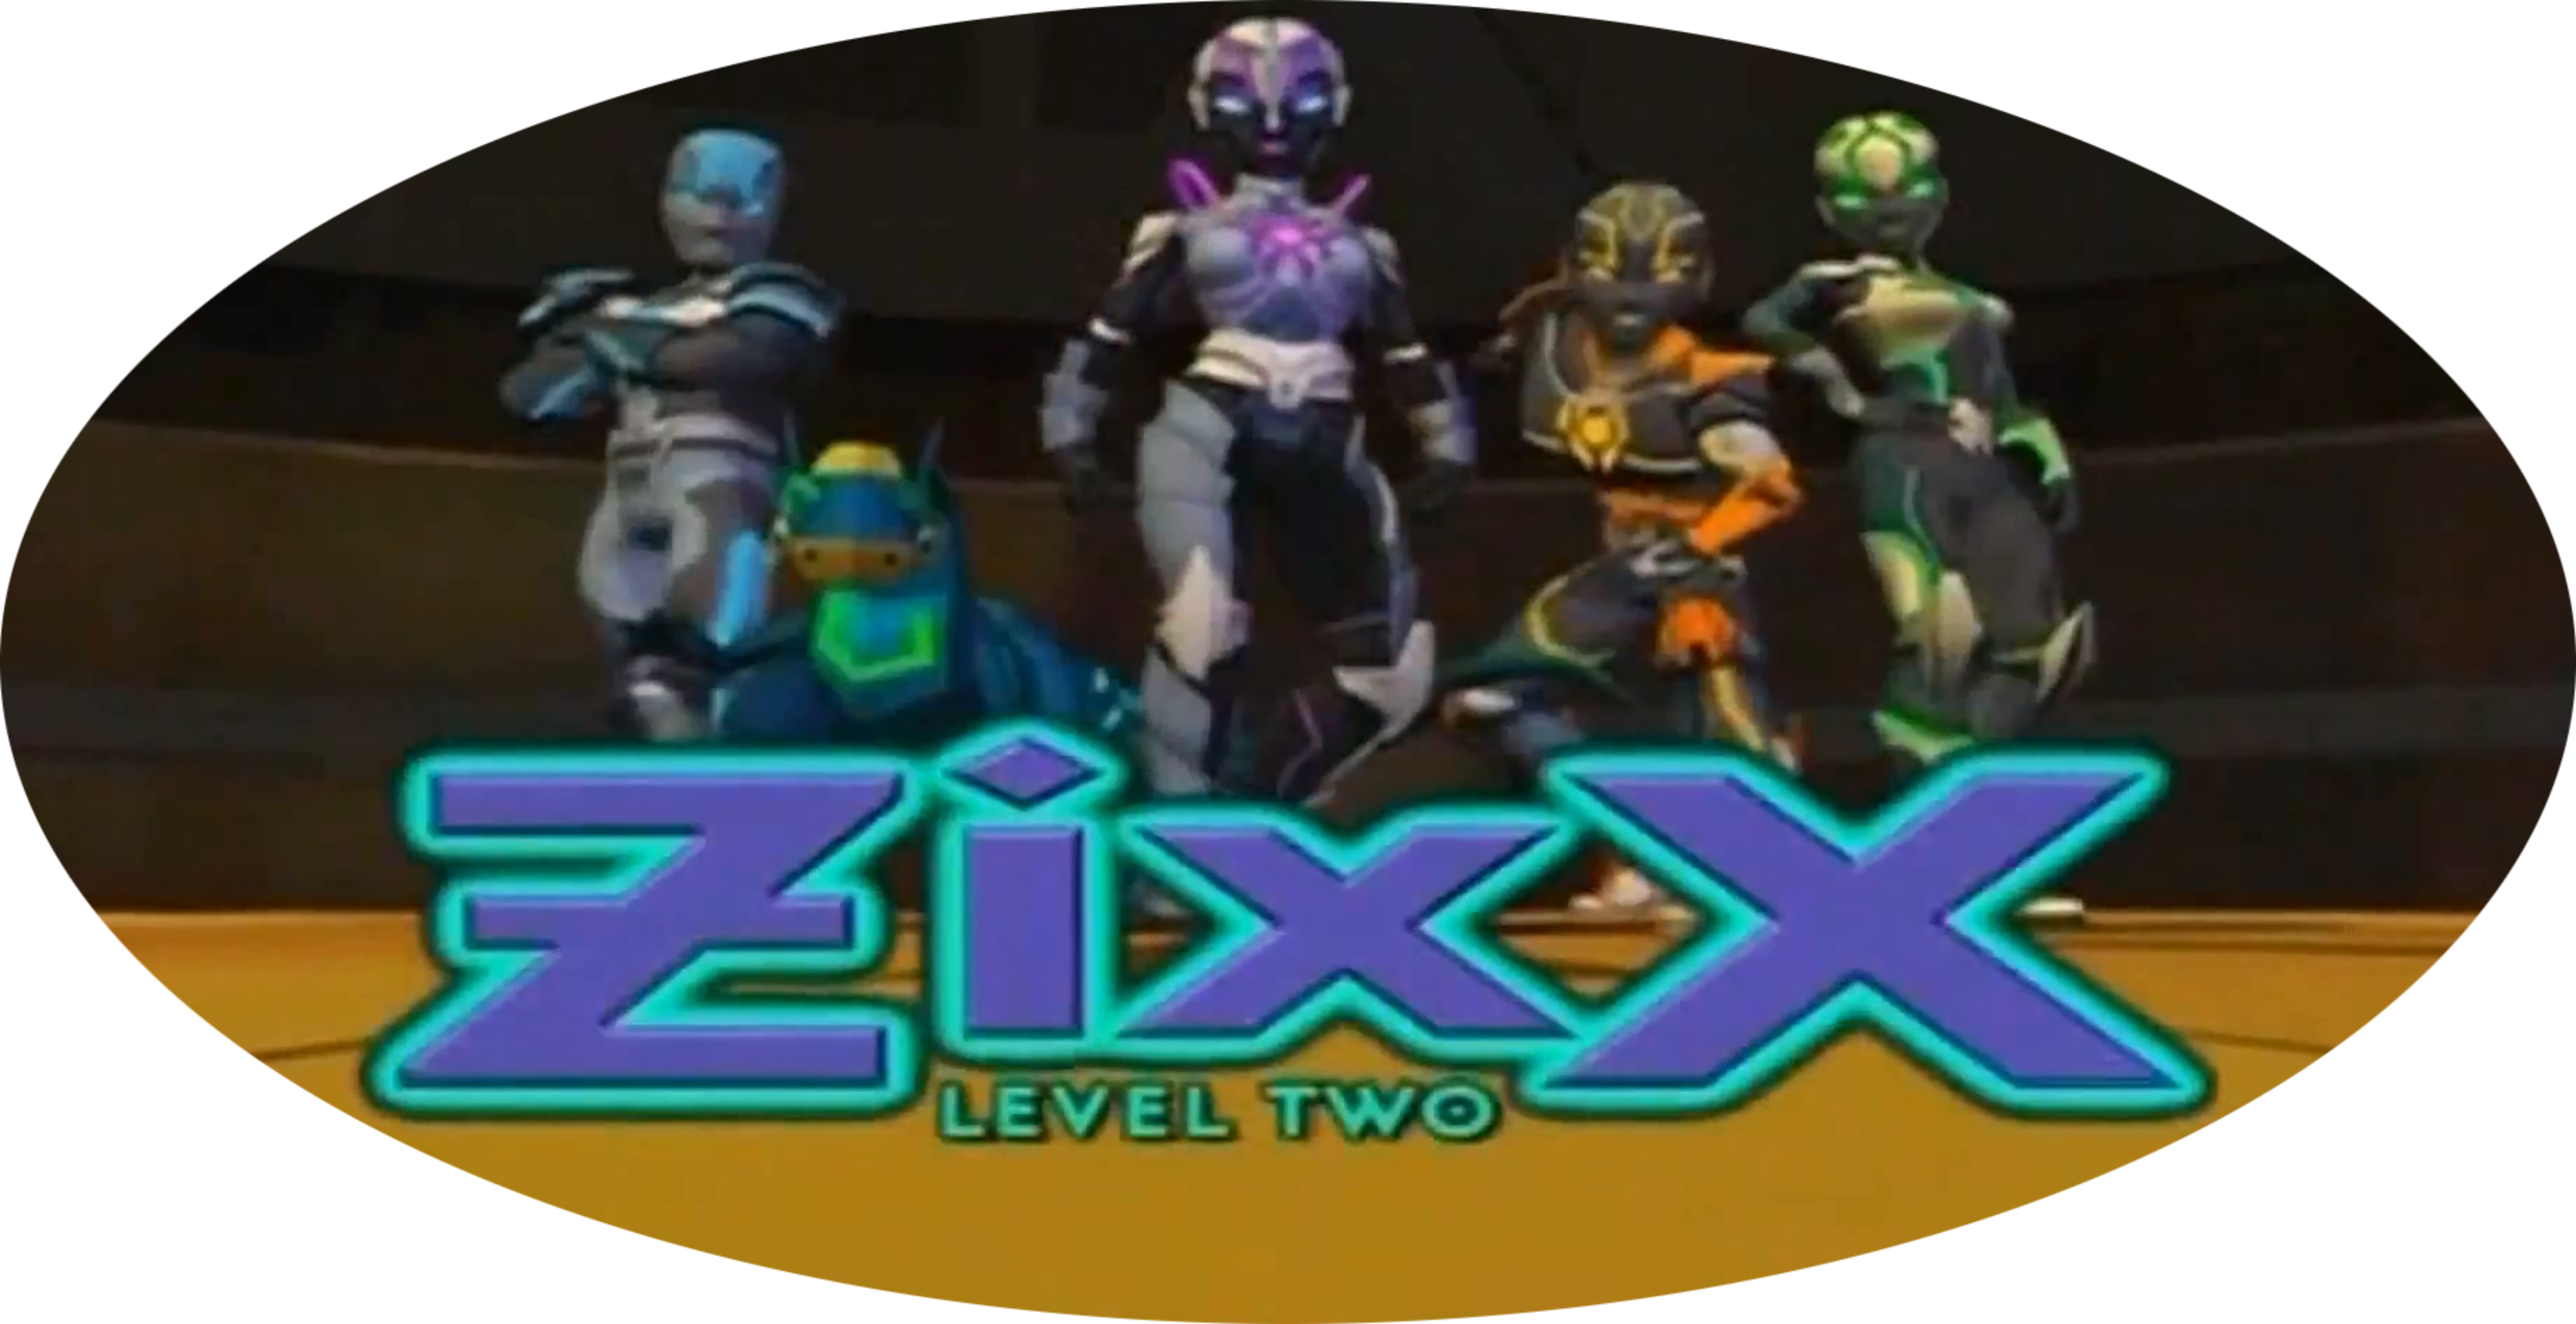 Zixx: Level Two Complete (1 DVD Box Set), BackToThe80sDVDs